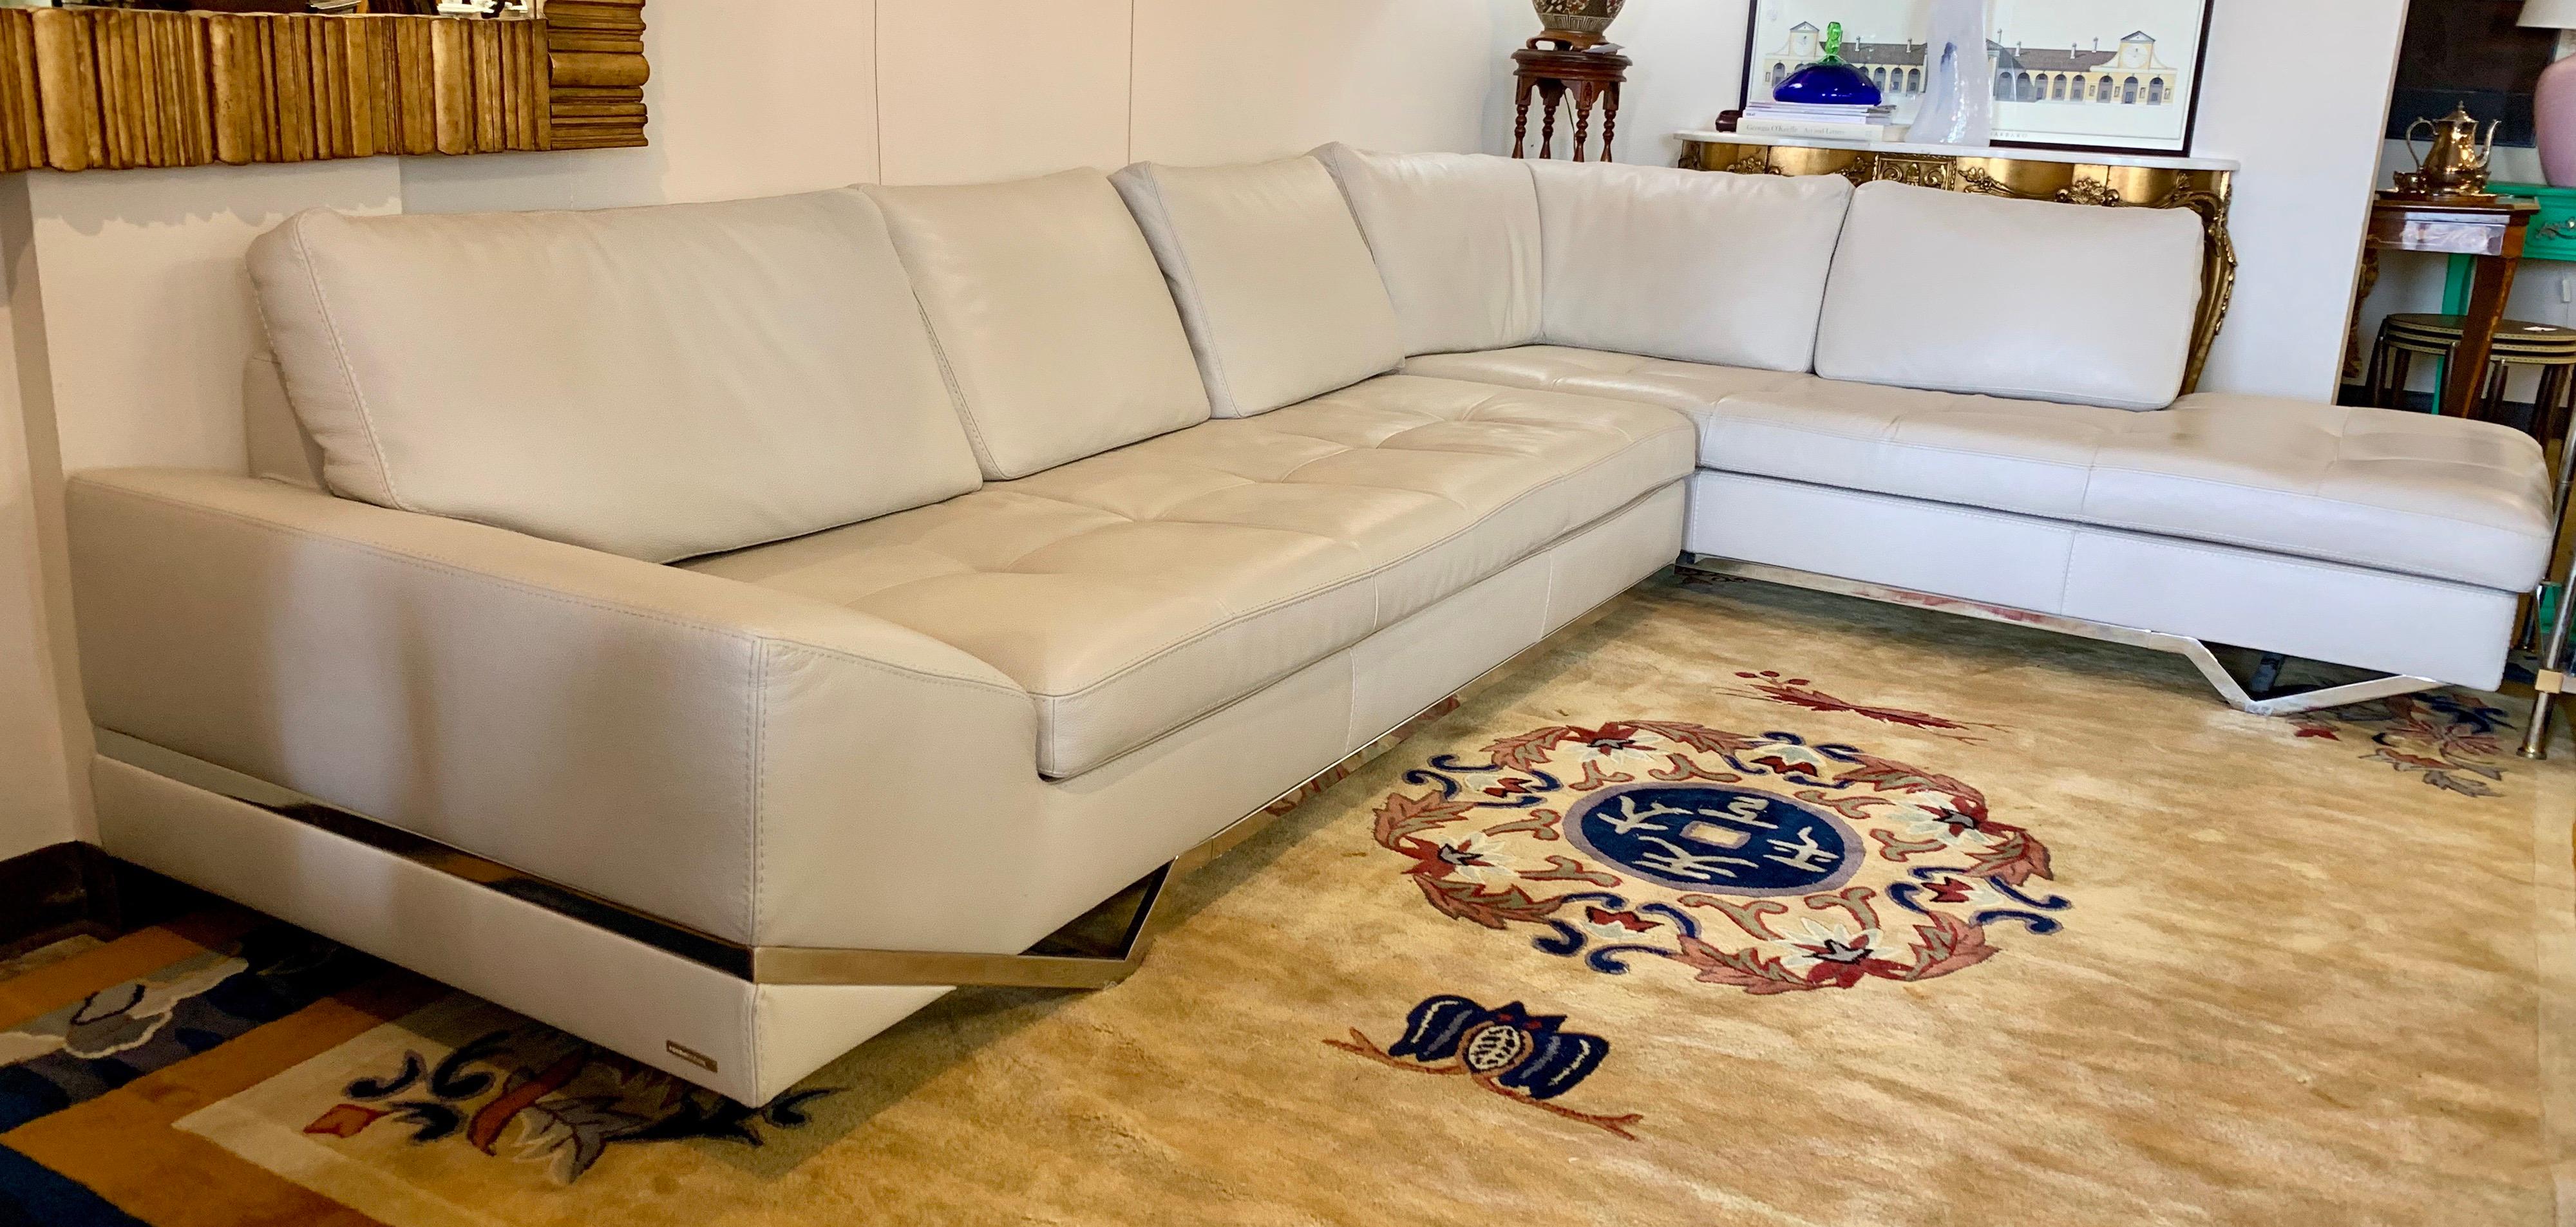 Large two-piece Roche Bobois sectional sofa with the most gorgeous leather fabric. Purchased new a few years ago from Roche Bobois NYC, it has sat in a living room since then and was sat on very rarely.
As it is configured in the photos, its